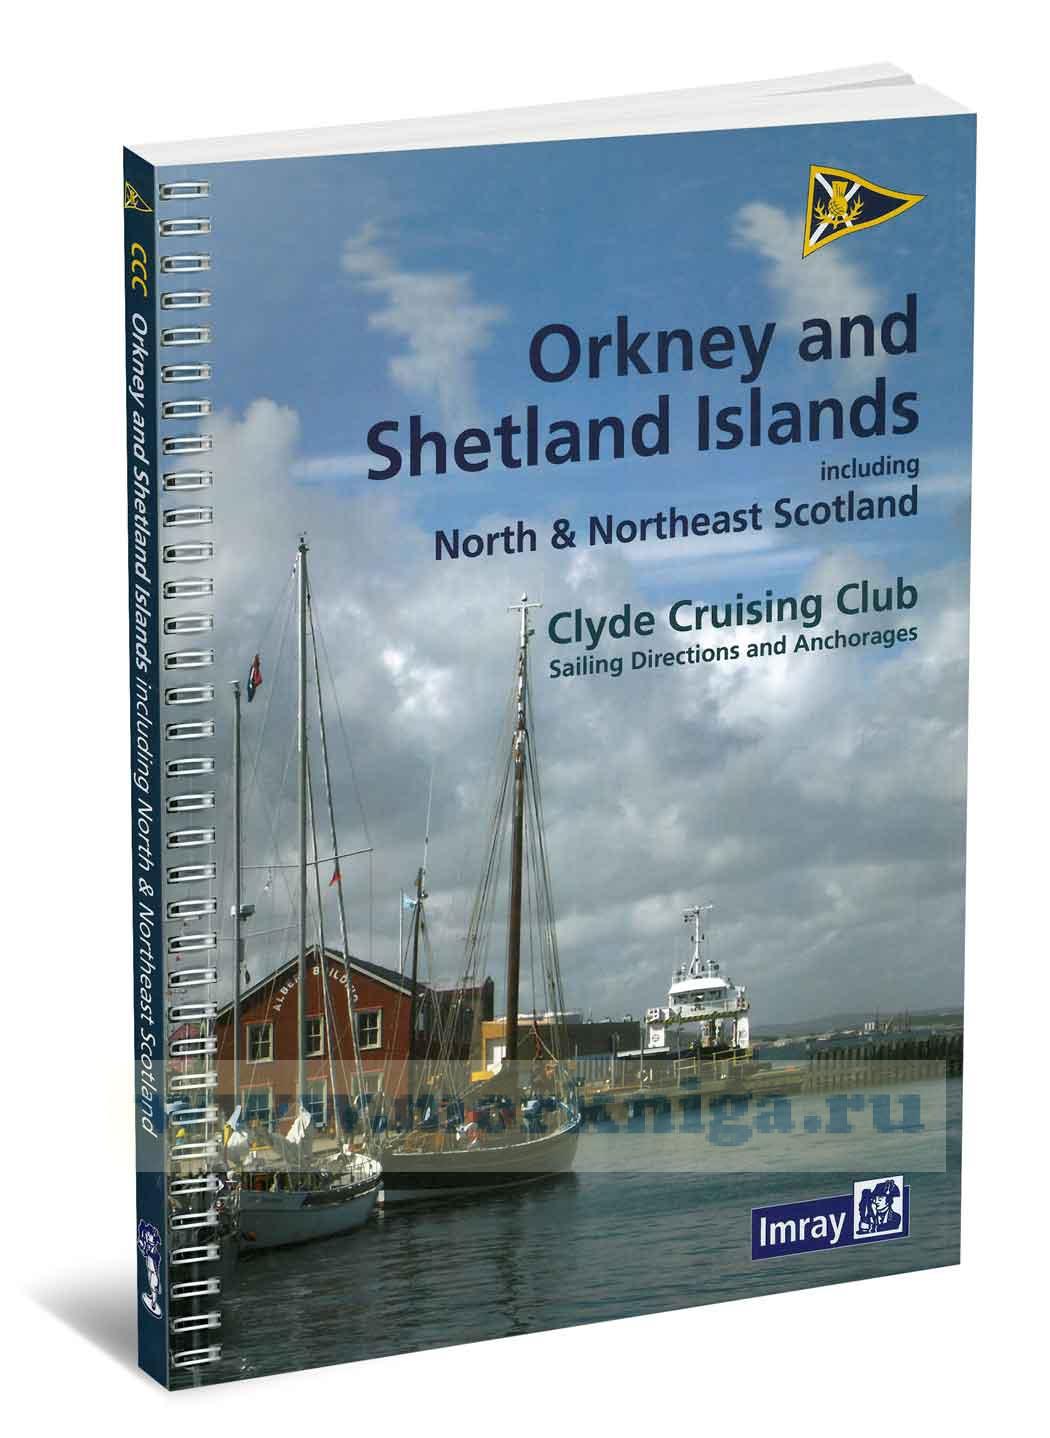 Clyde Cruising Club Sailing Directions & Anchorages Orkney Islands and Scotland islands including North & North East Scotland  Шетланские и Окнейские острова